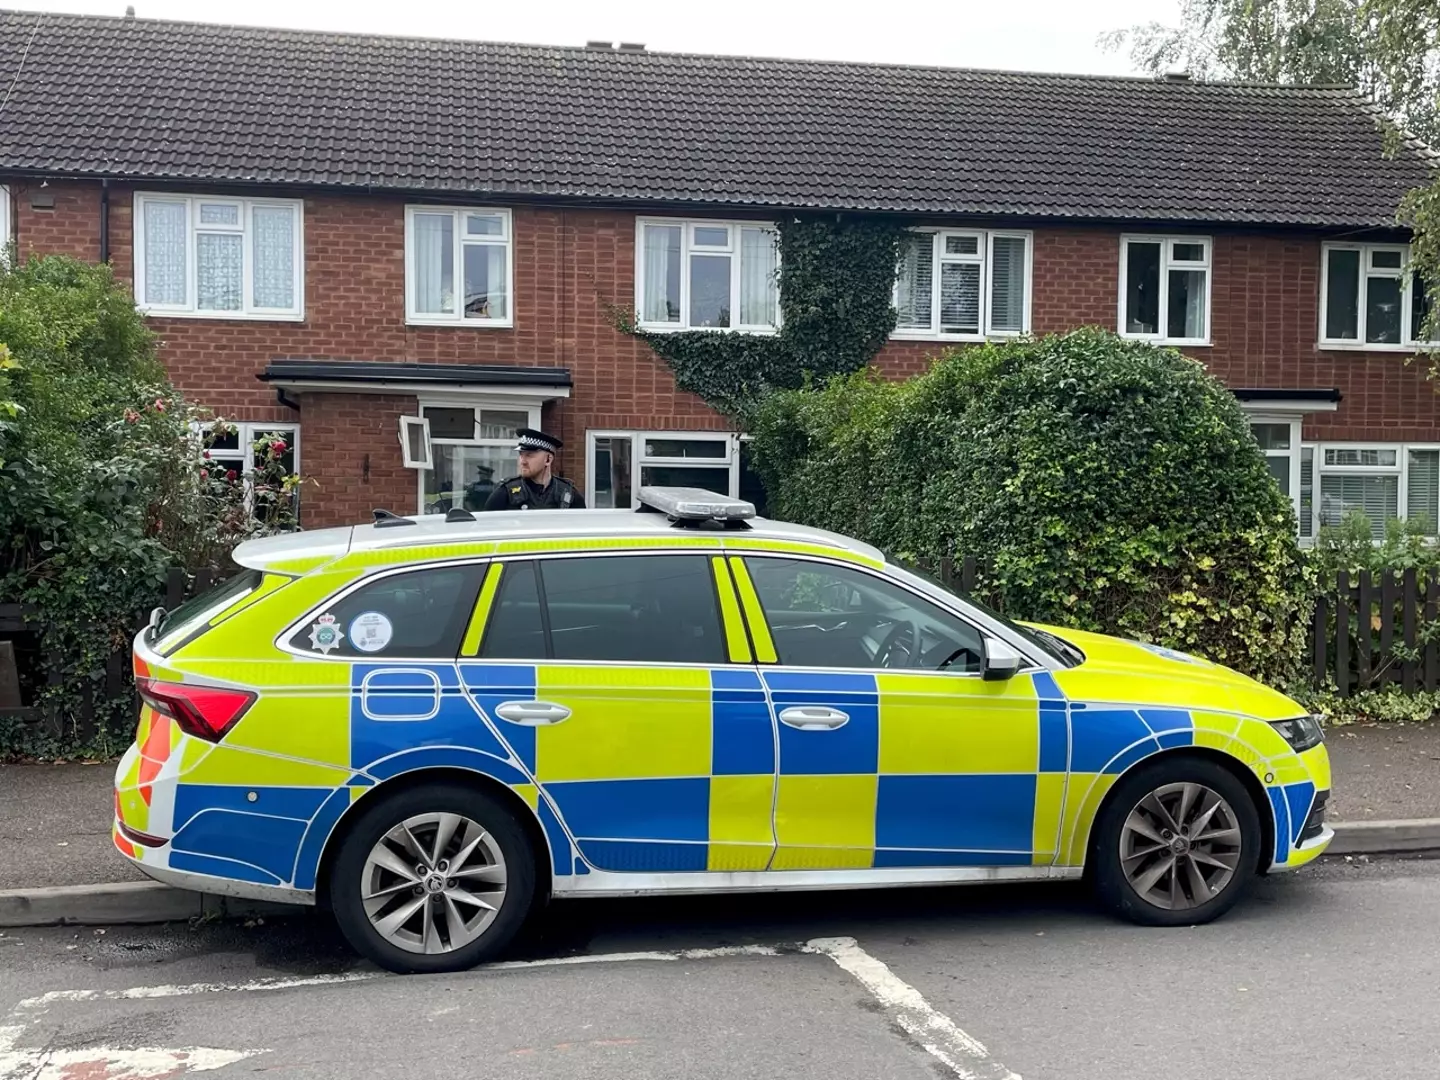 A man who was attacked by two dogs in Staffordshire has died.